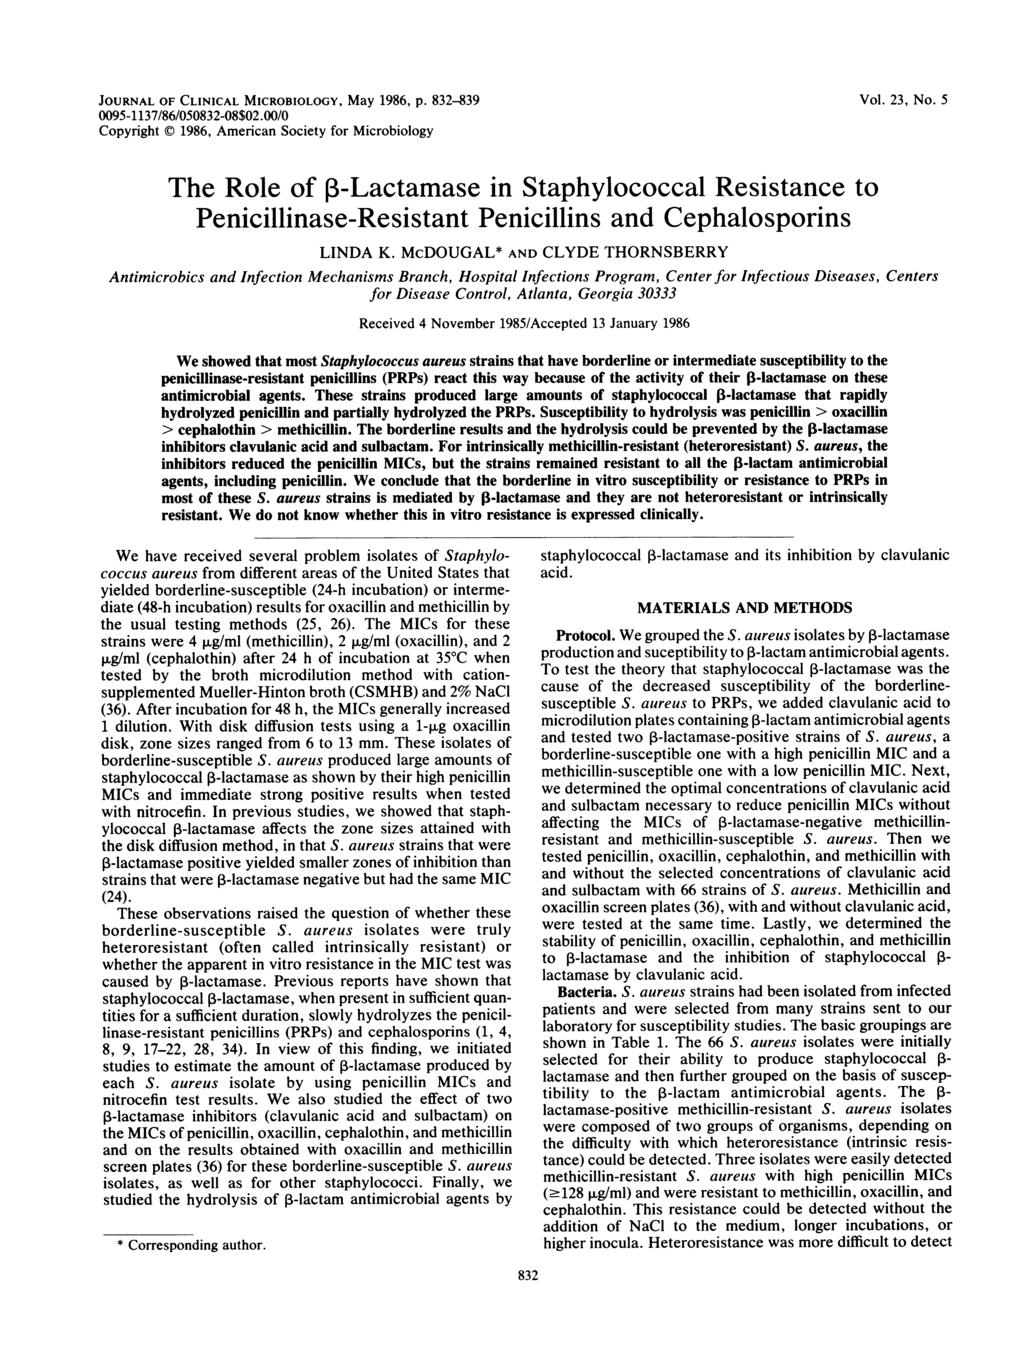 JOURNAL OF CLINICAL MICROBIOLOGY, May 1986, p. 832-839 0095-1137/86/050832-08$02.00/0 Copyright C 1986, American Society for Microbiology Vol. 23, No.